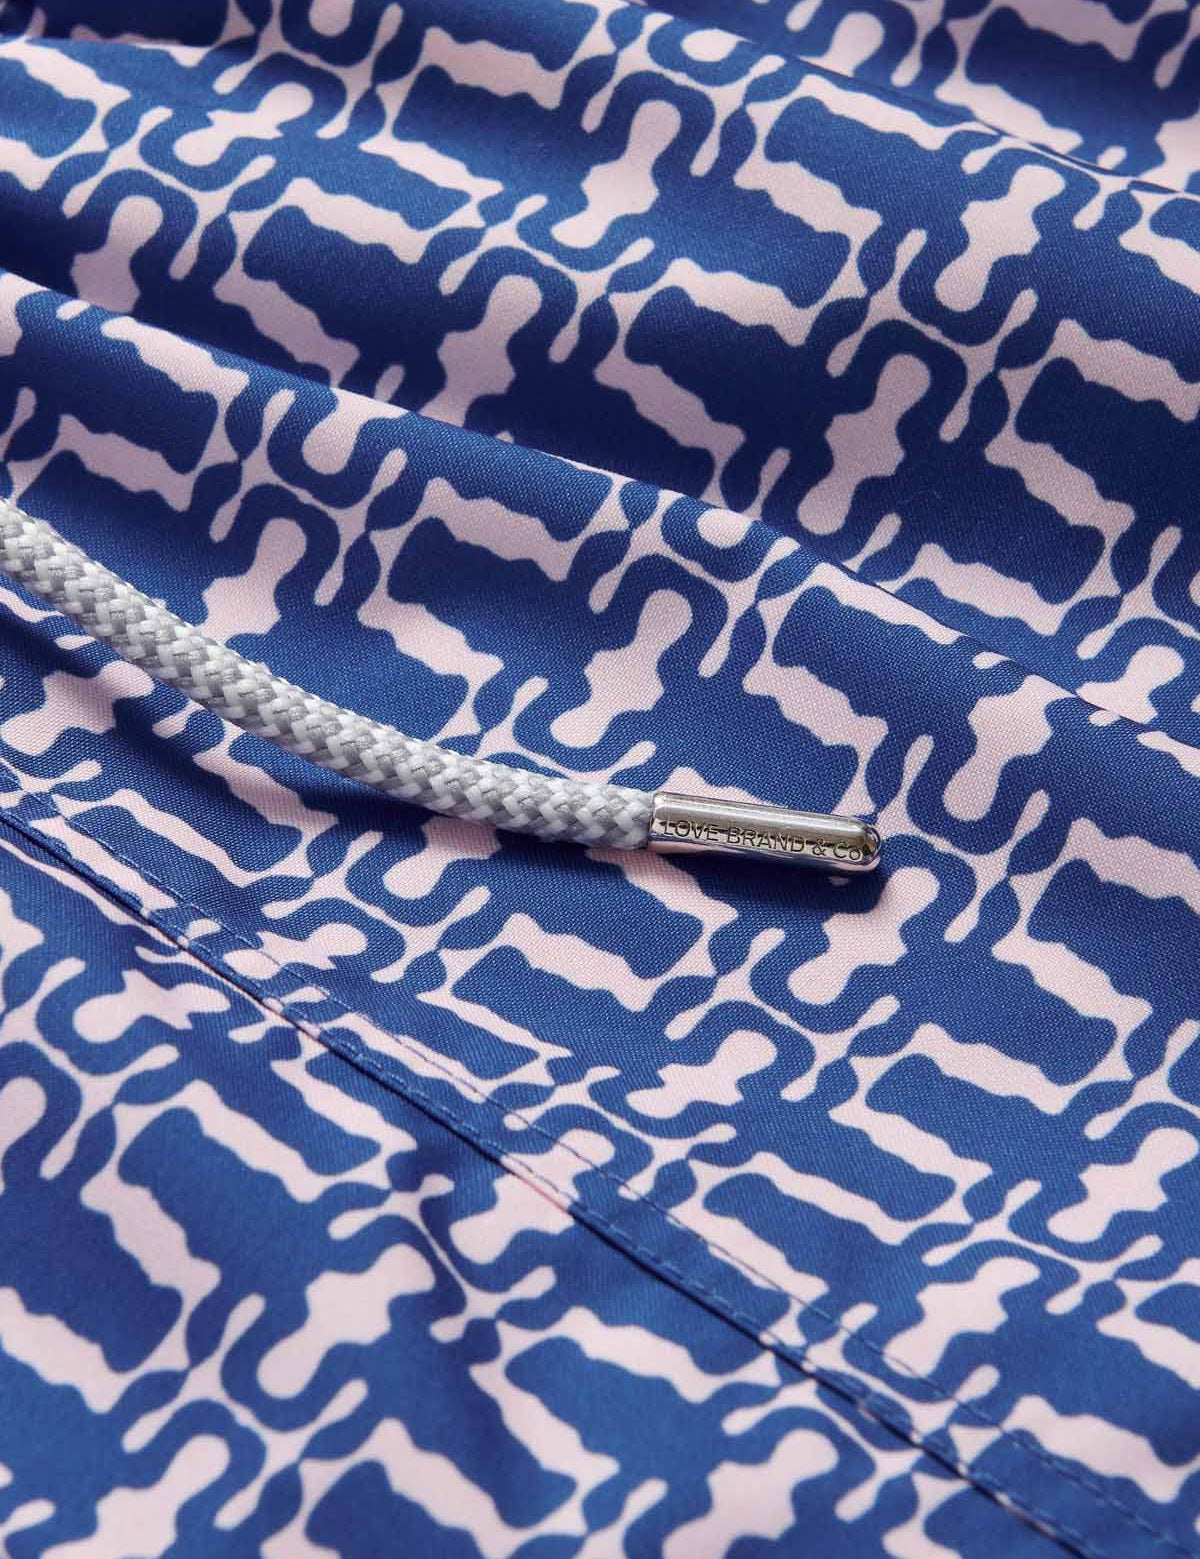 Close-up of Men's Wilderness Staniel Swim Shorts featuring a blue and white African-inspired geometric pattern with wildebeest horned heads and detailed drawstring.